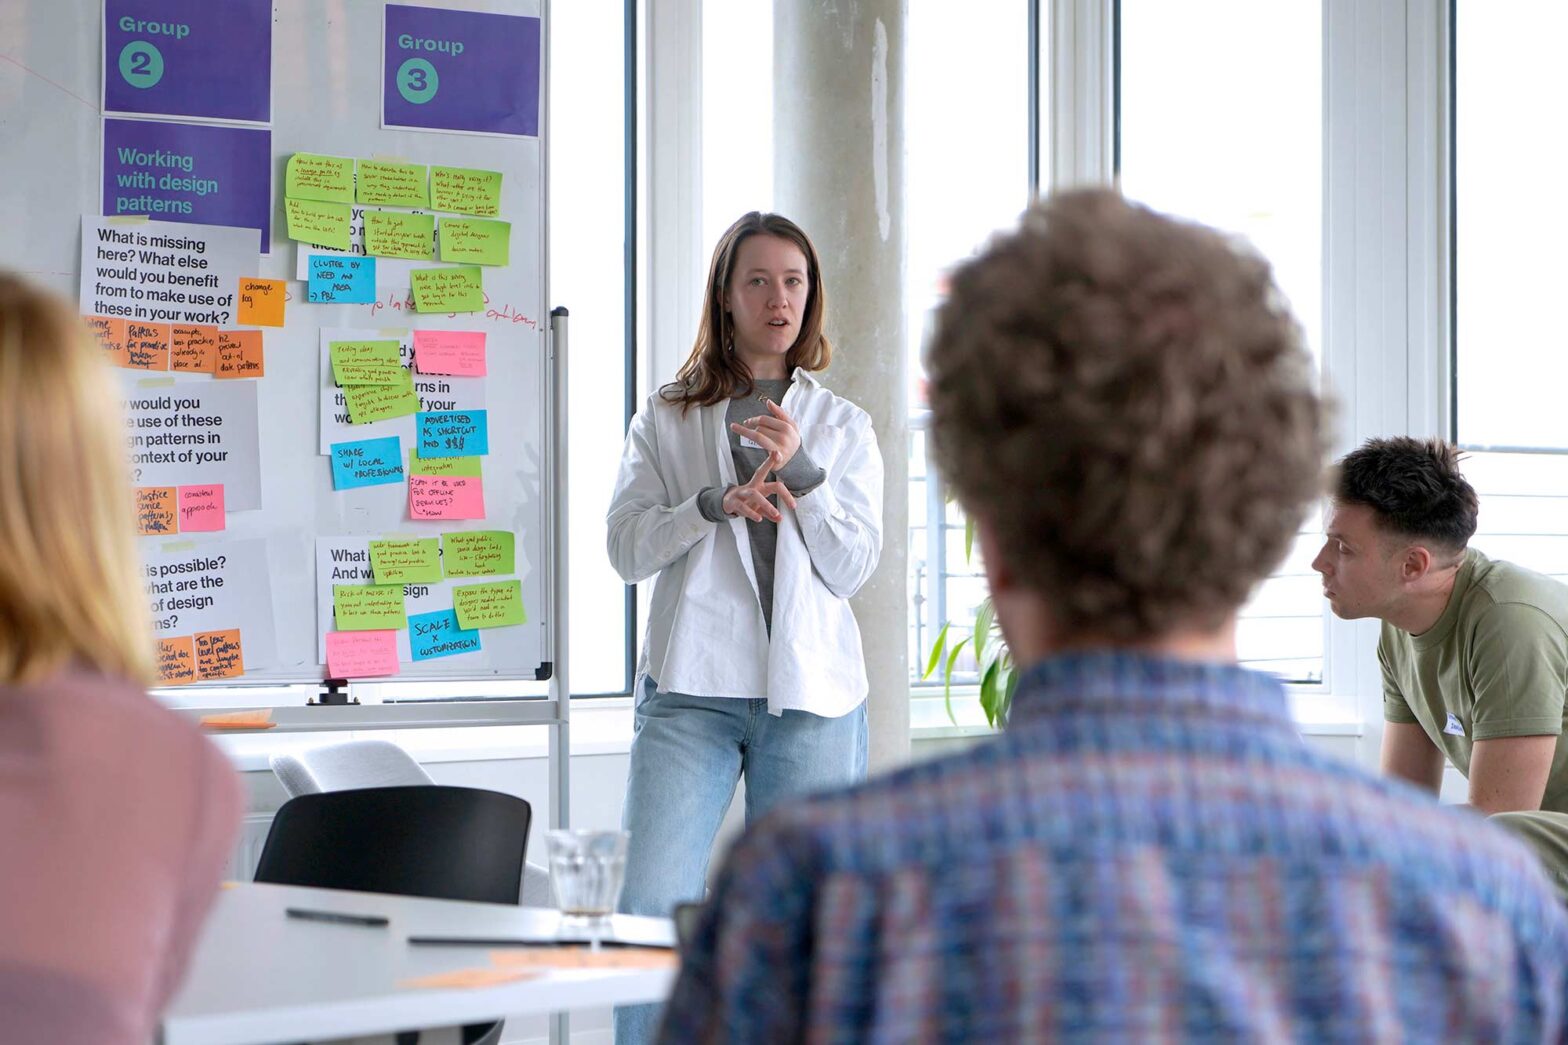 A woman stands in front of a whiteboard filled with colorful sticky notes, presenting to a group. She wears a white shirt over a gray top and blue jeans, gesturing with her hands. Two individuals, one with curly hair and another in a green t-shirt, listen attentively. The whiteboard has two sections labeled "Group 2" and "Group 3" with various questions and comments written on the notes. The room is bright with large windows in the background.